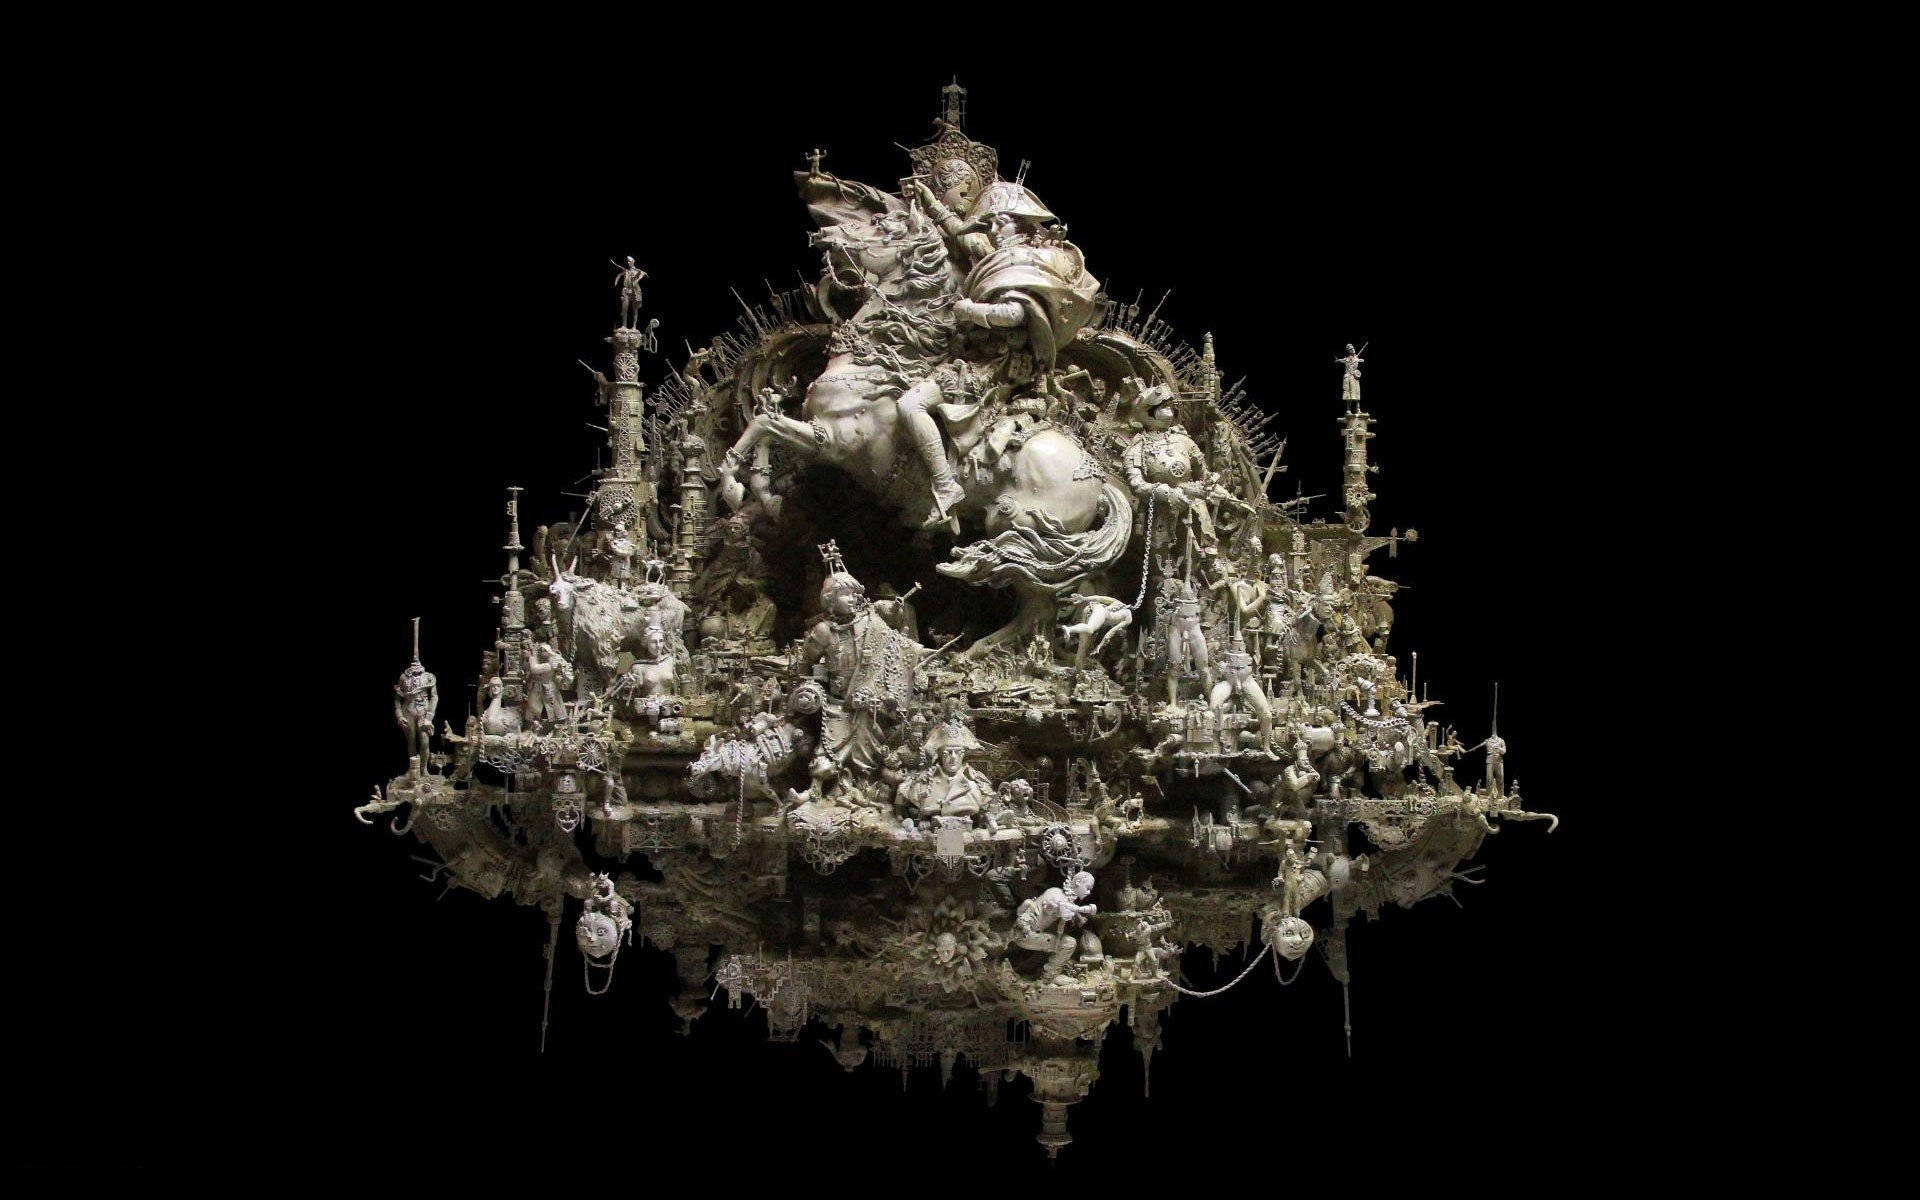 Intricate Assemblage Sculpture Background